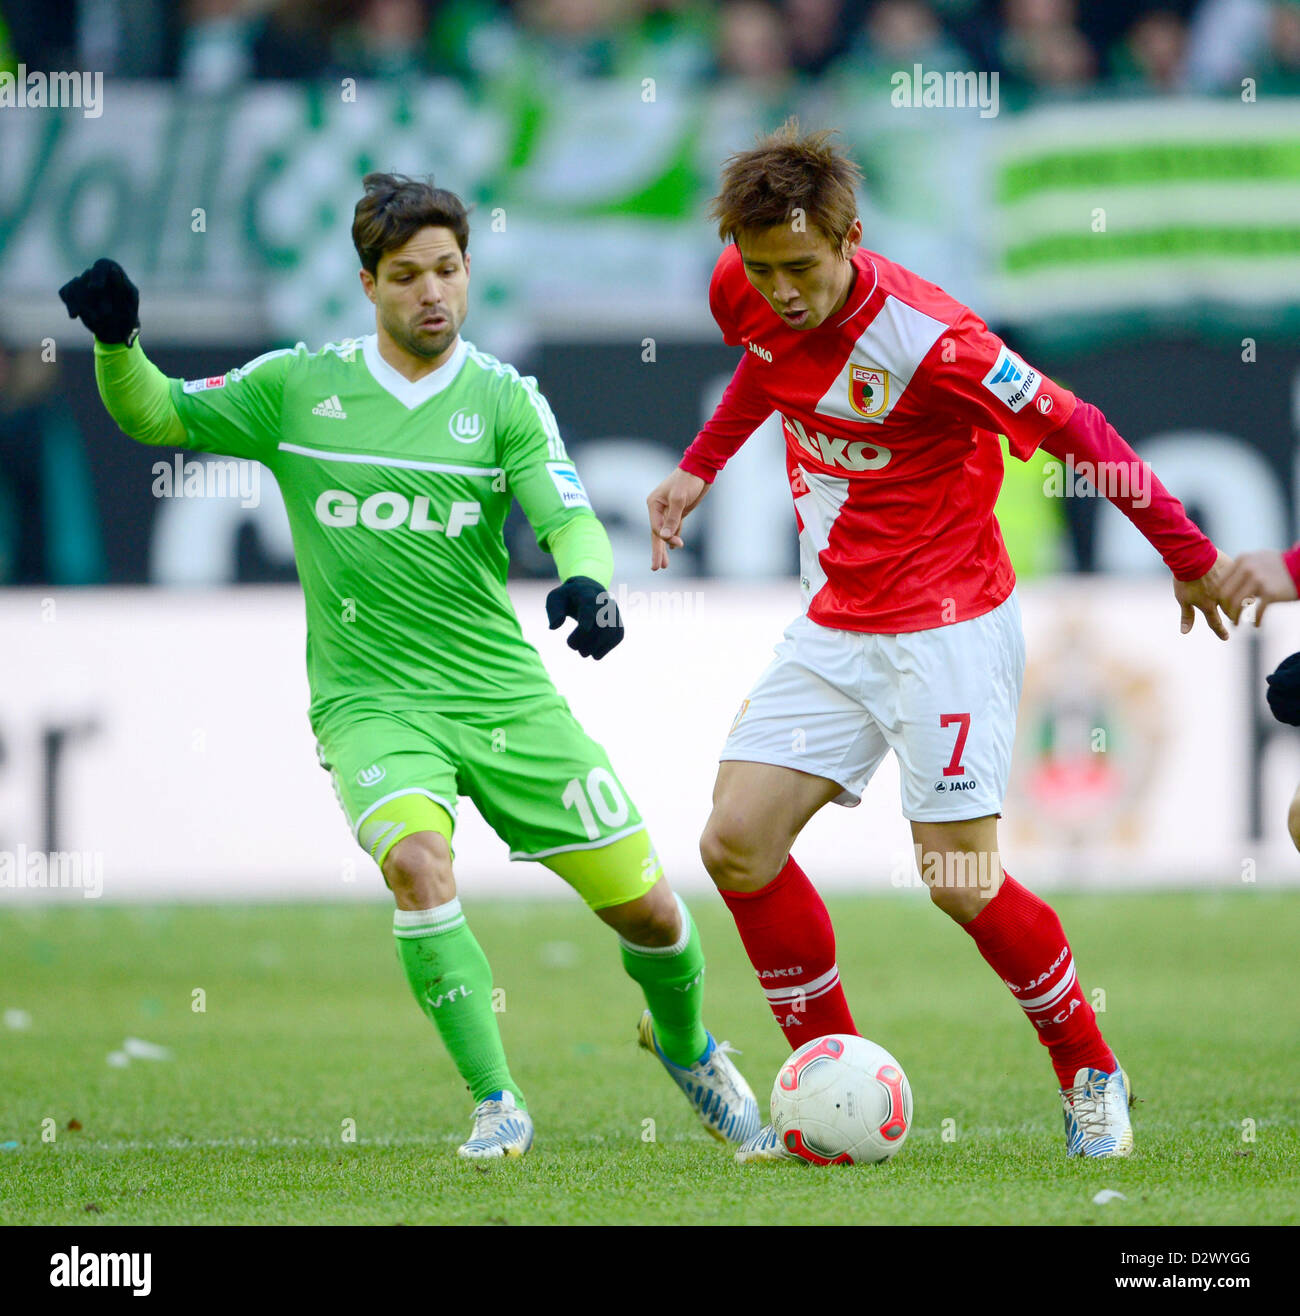 Wolfsburgs Diego (R) vies for the ball with Augsburg's   Ja-Cheol Koo during the Bundesliga soccer match between VfL Wolfsburg and FC Augsburg at Volkswagen Arena in Wolfsburg, Germany, 02 February 2013. Photo: PETER STEFFEN Stock Photo